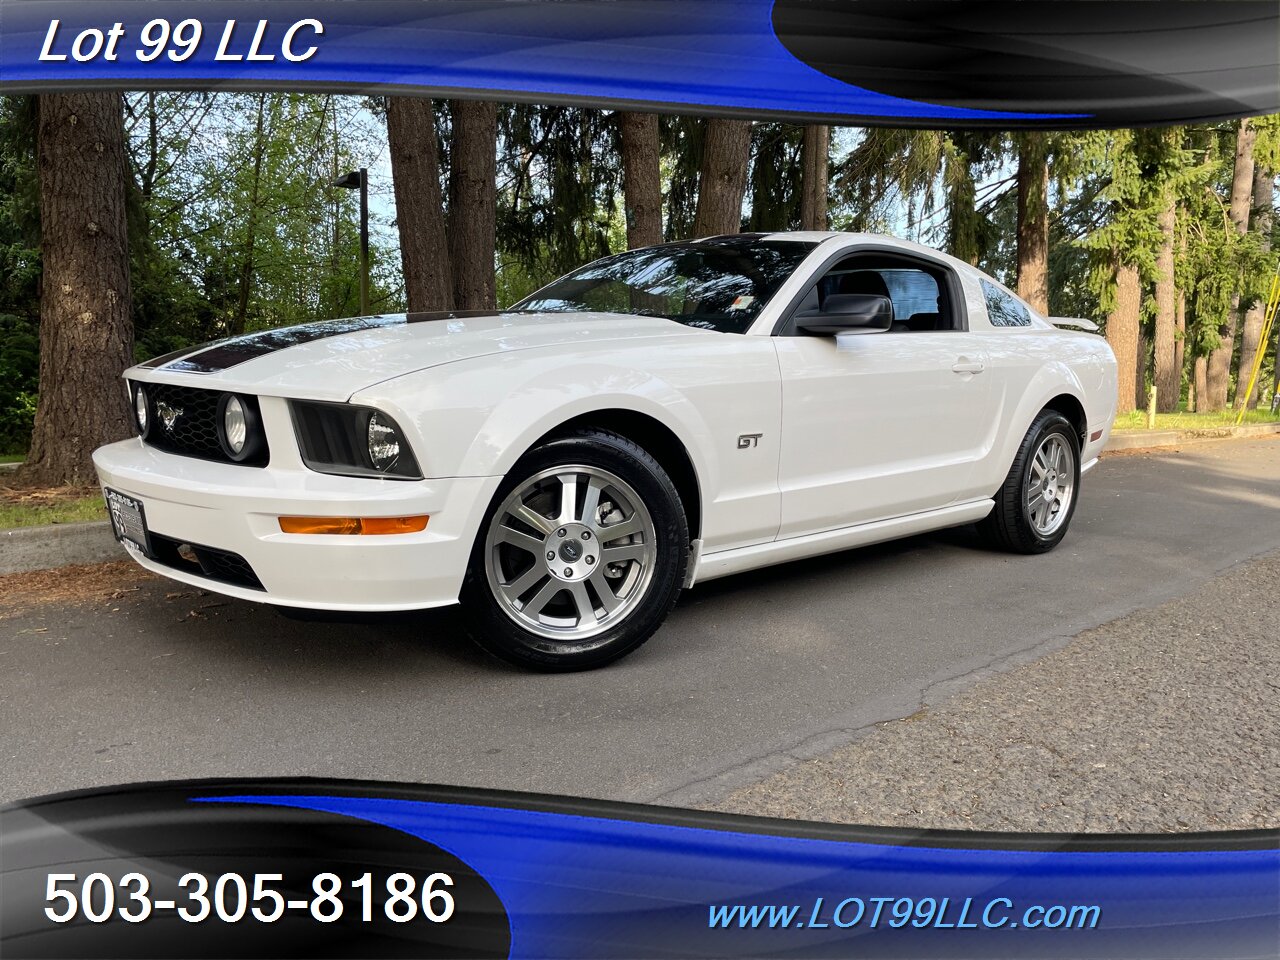 2005 Ford Mustang GT Deluxe 4.6L V8 5 Speed Manual Leather Purple Ra   - Photo 3 - Milwaukie, OR 97267